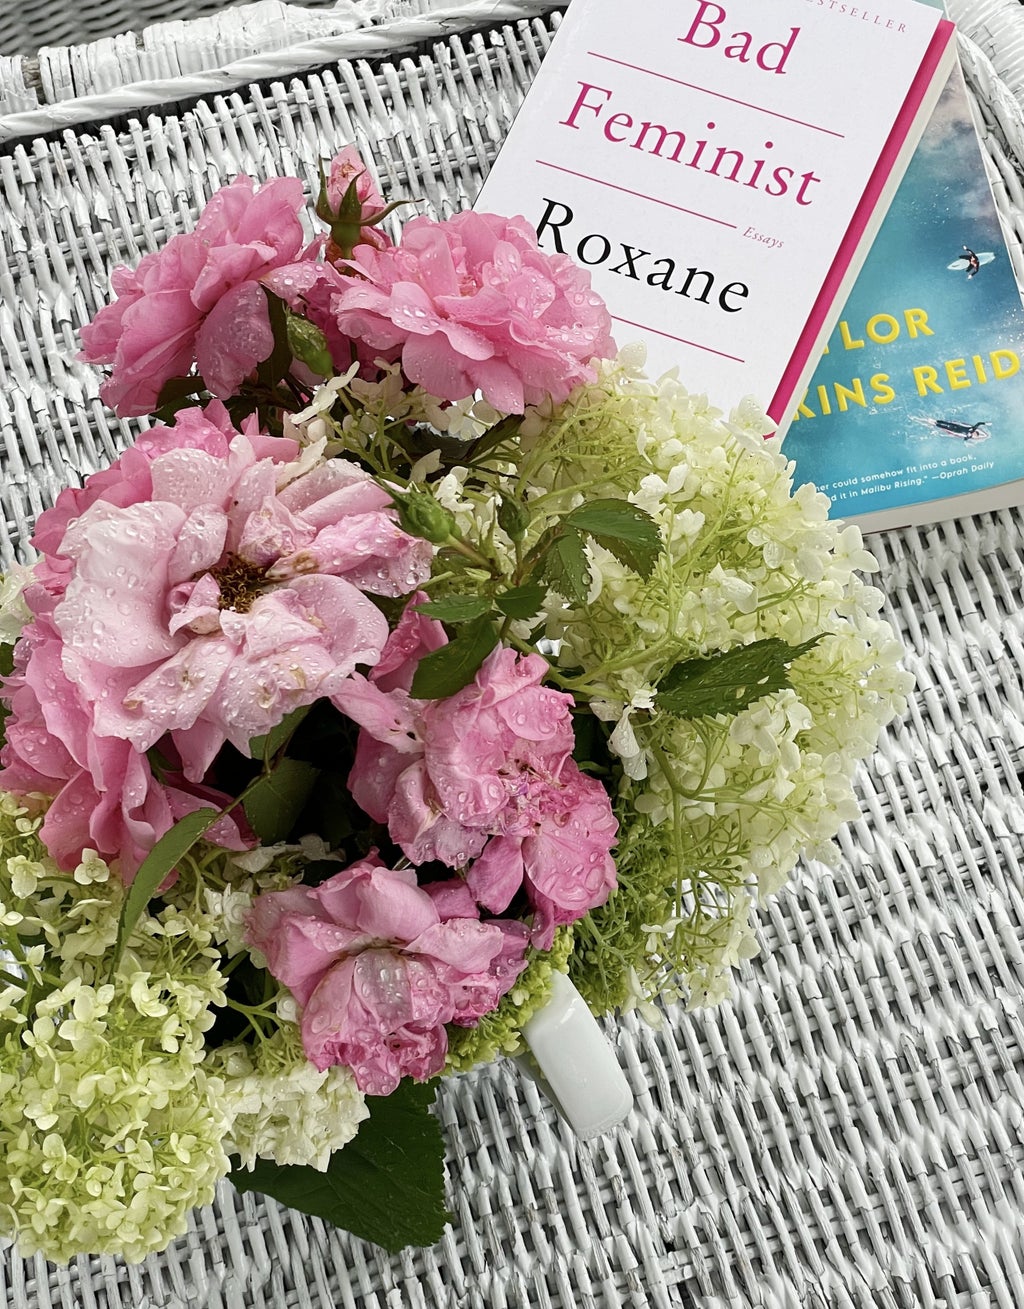 flowers on a white table with two books